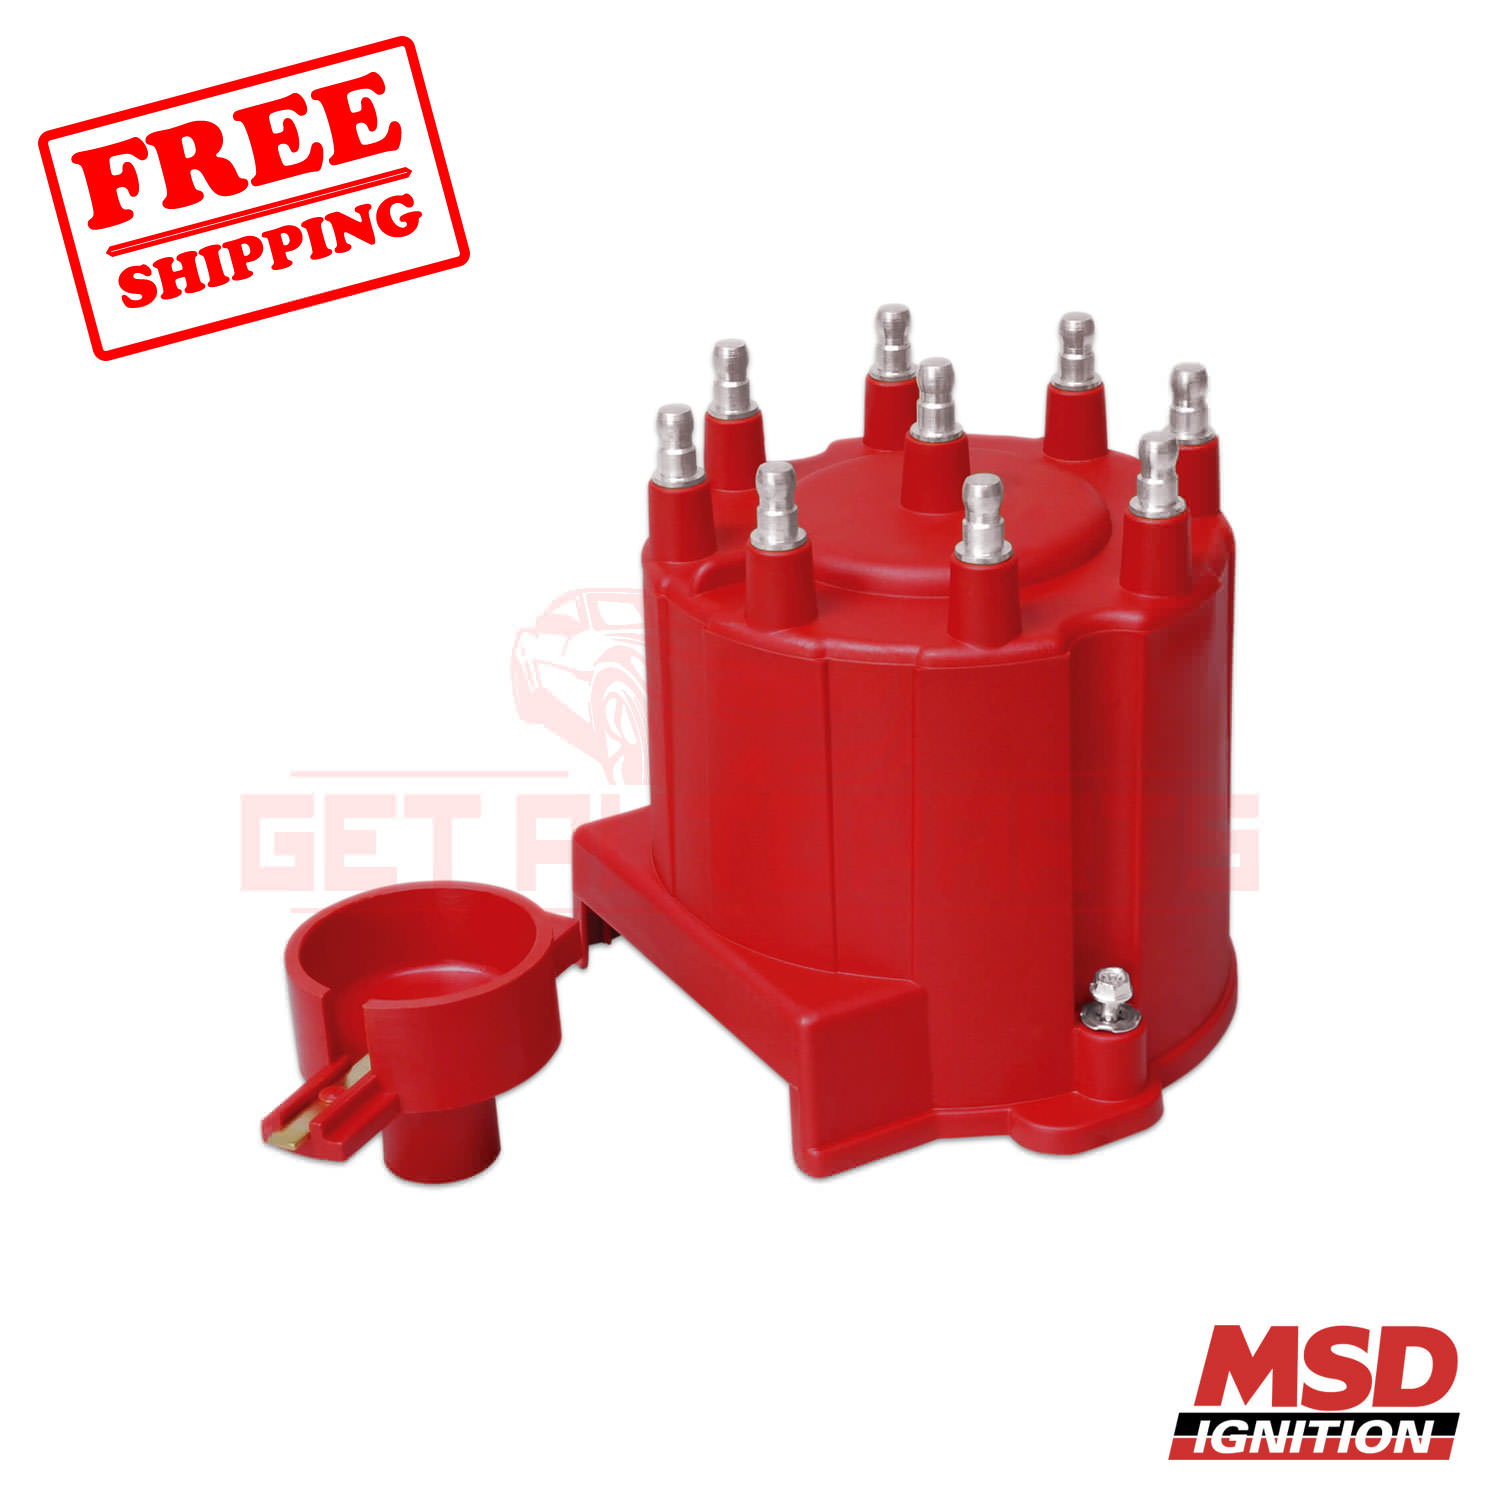 MSD Rare Distributor Cap and Rotor Kit Chevrolet All items in the store 1988 with fits C1500